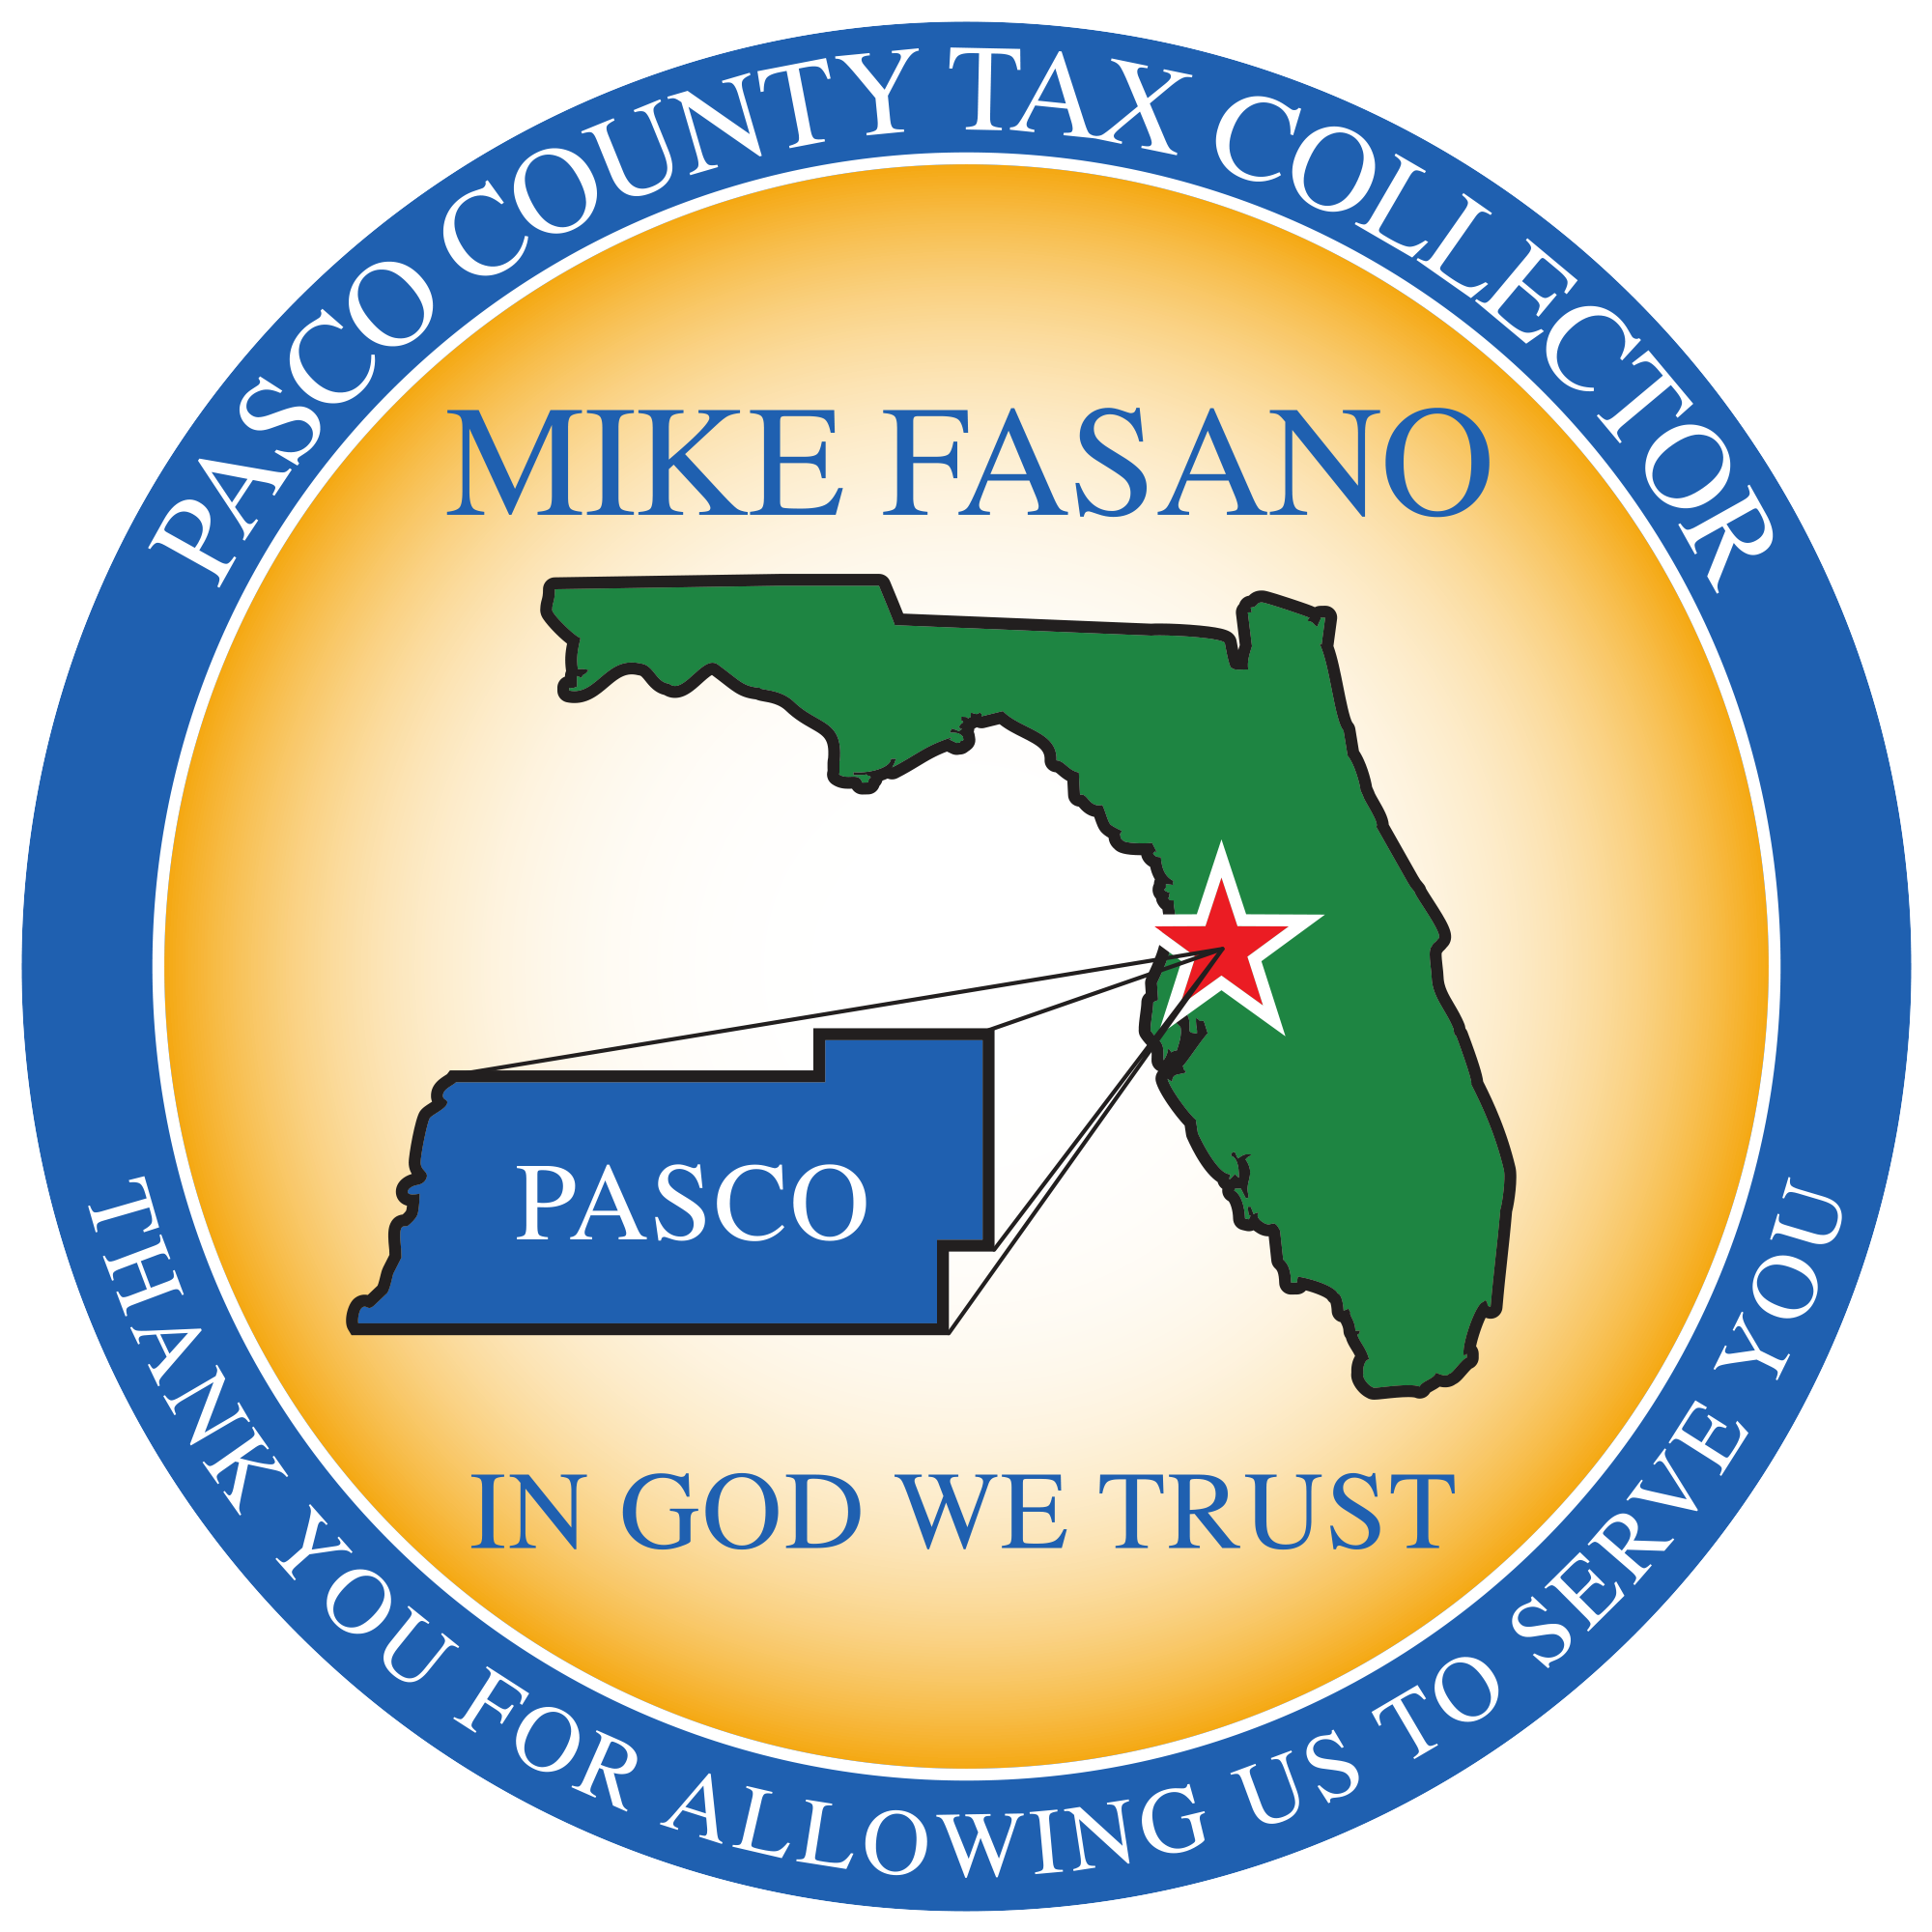 Pasco County Tax Collector, equipped with a range of legal services for citizens